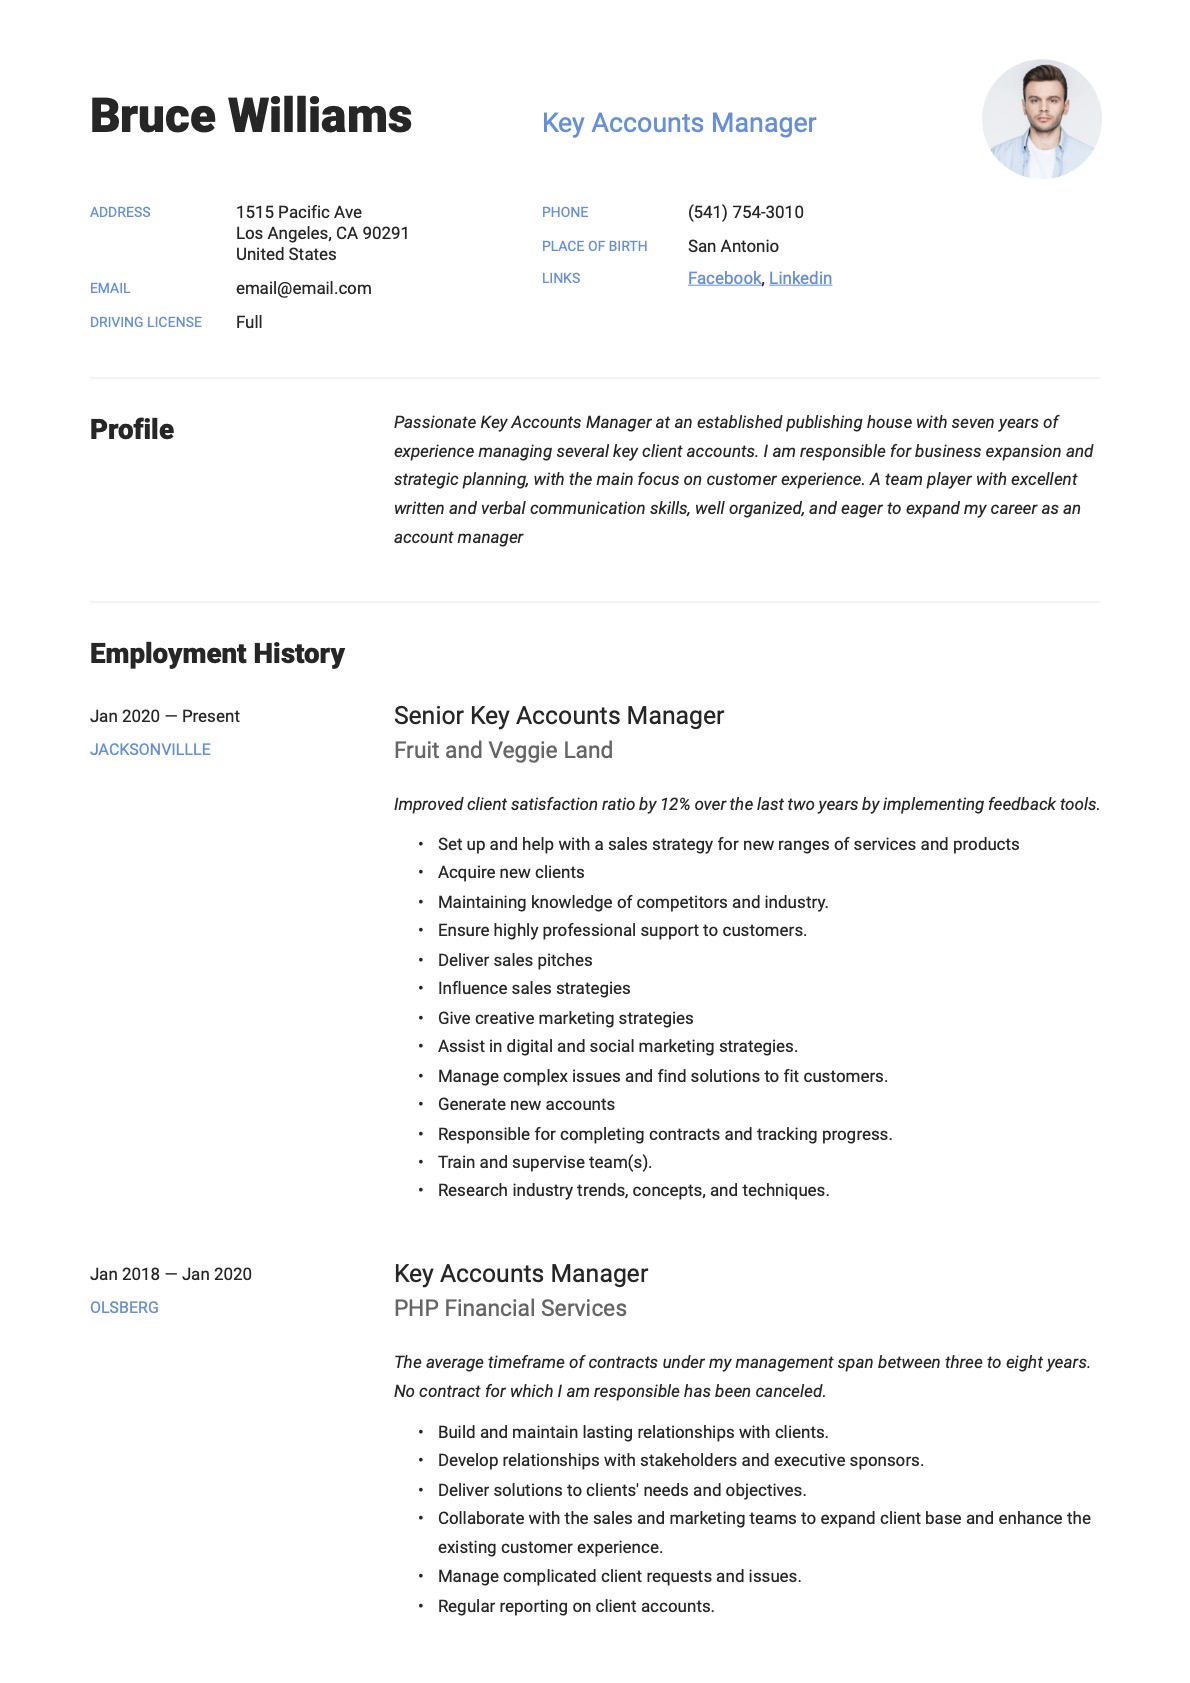 Example resume key accounts manager-16